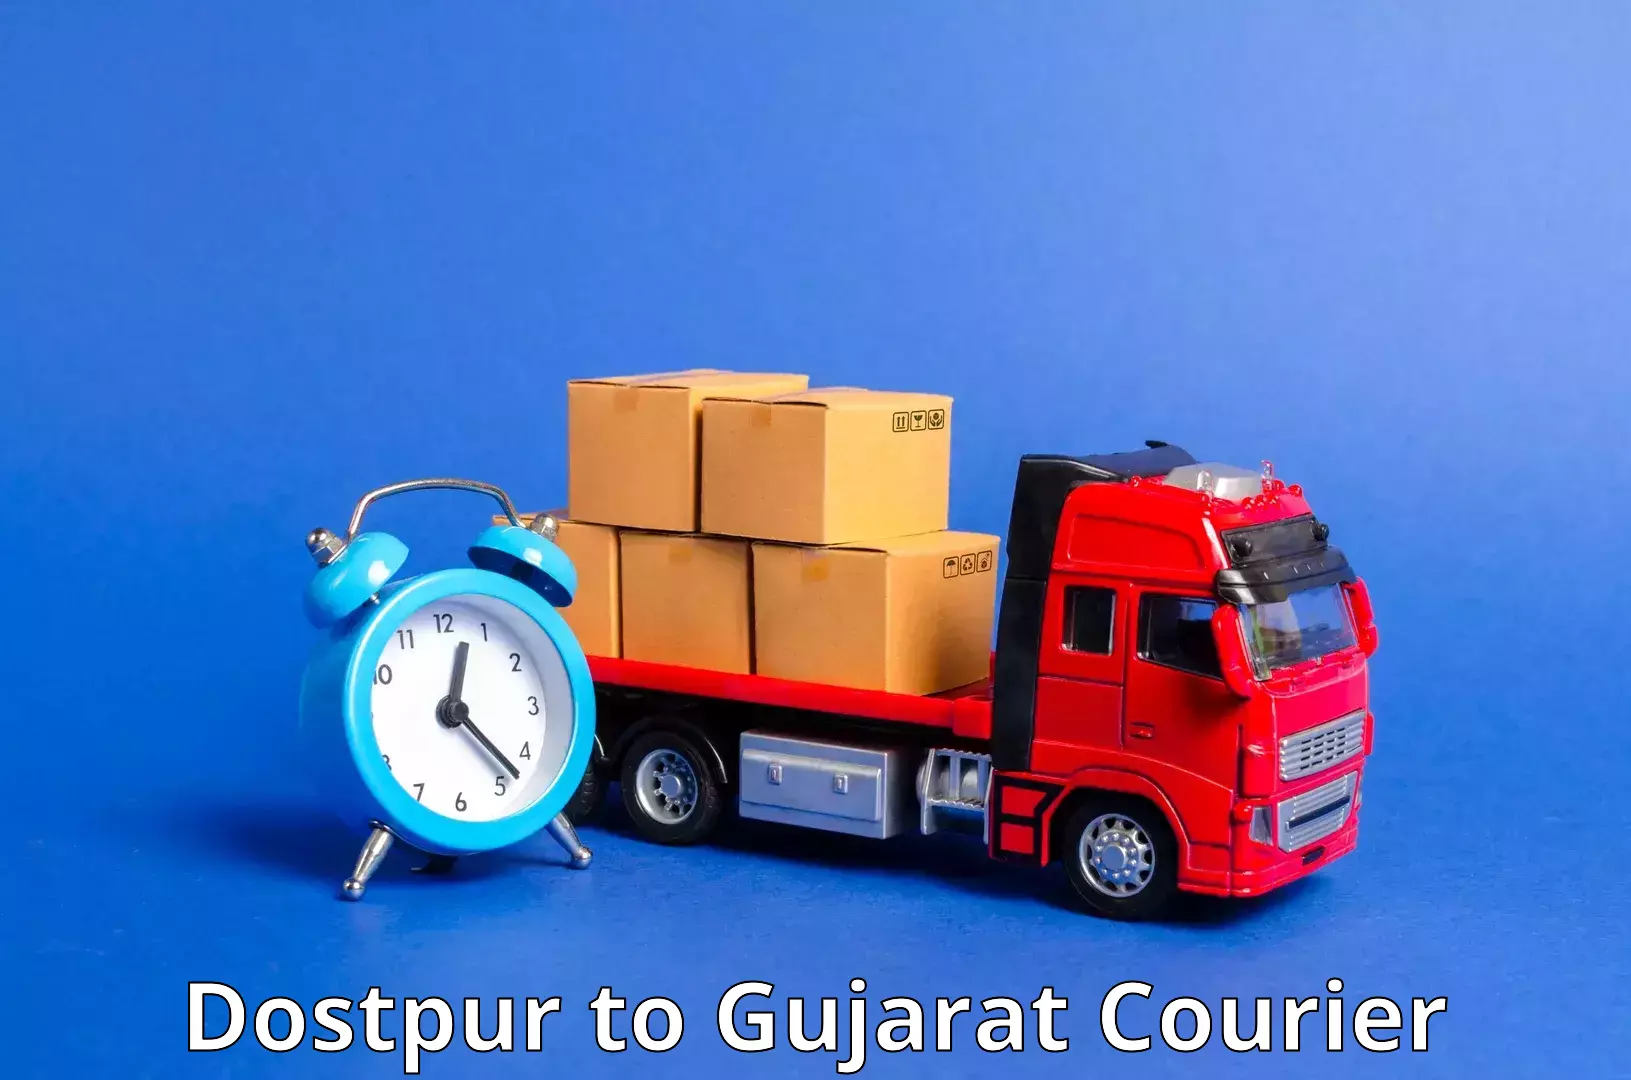 Air courier services Dostpur to Bhatiya